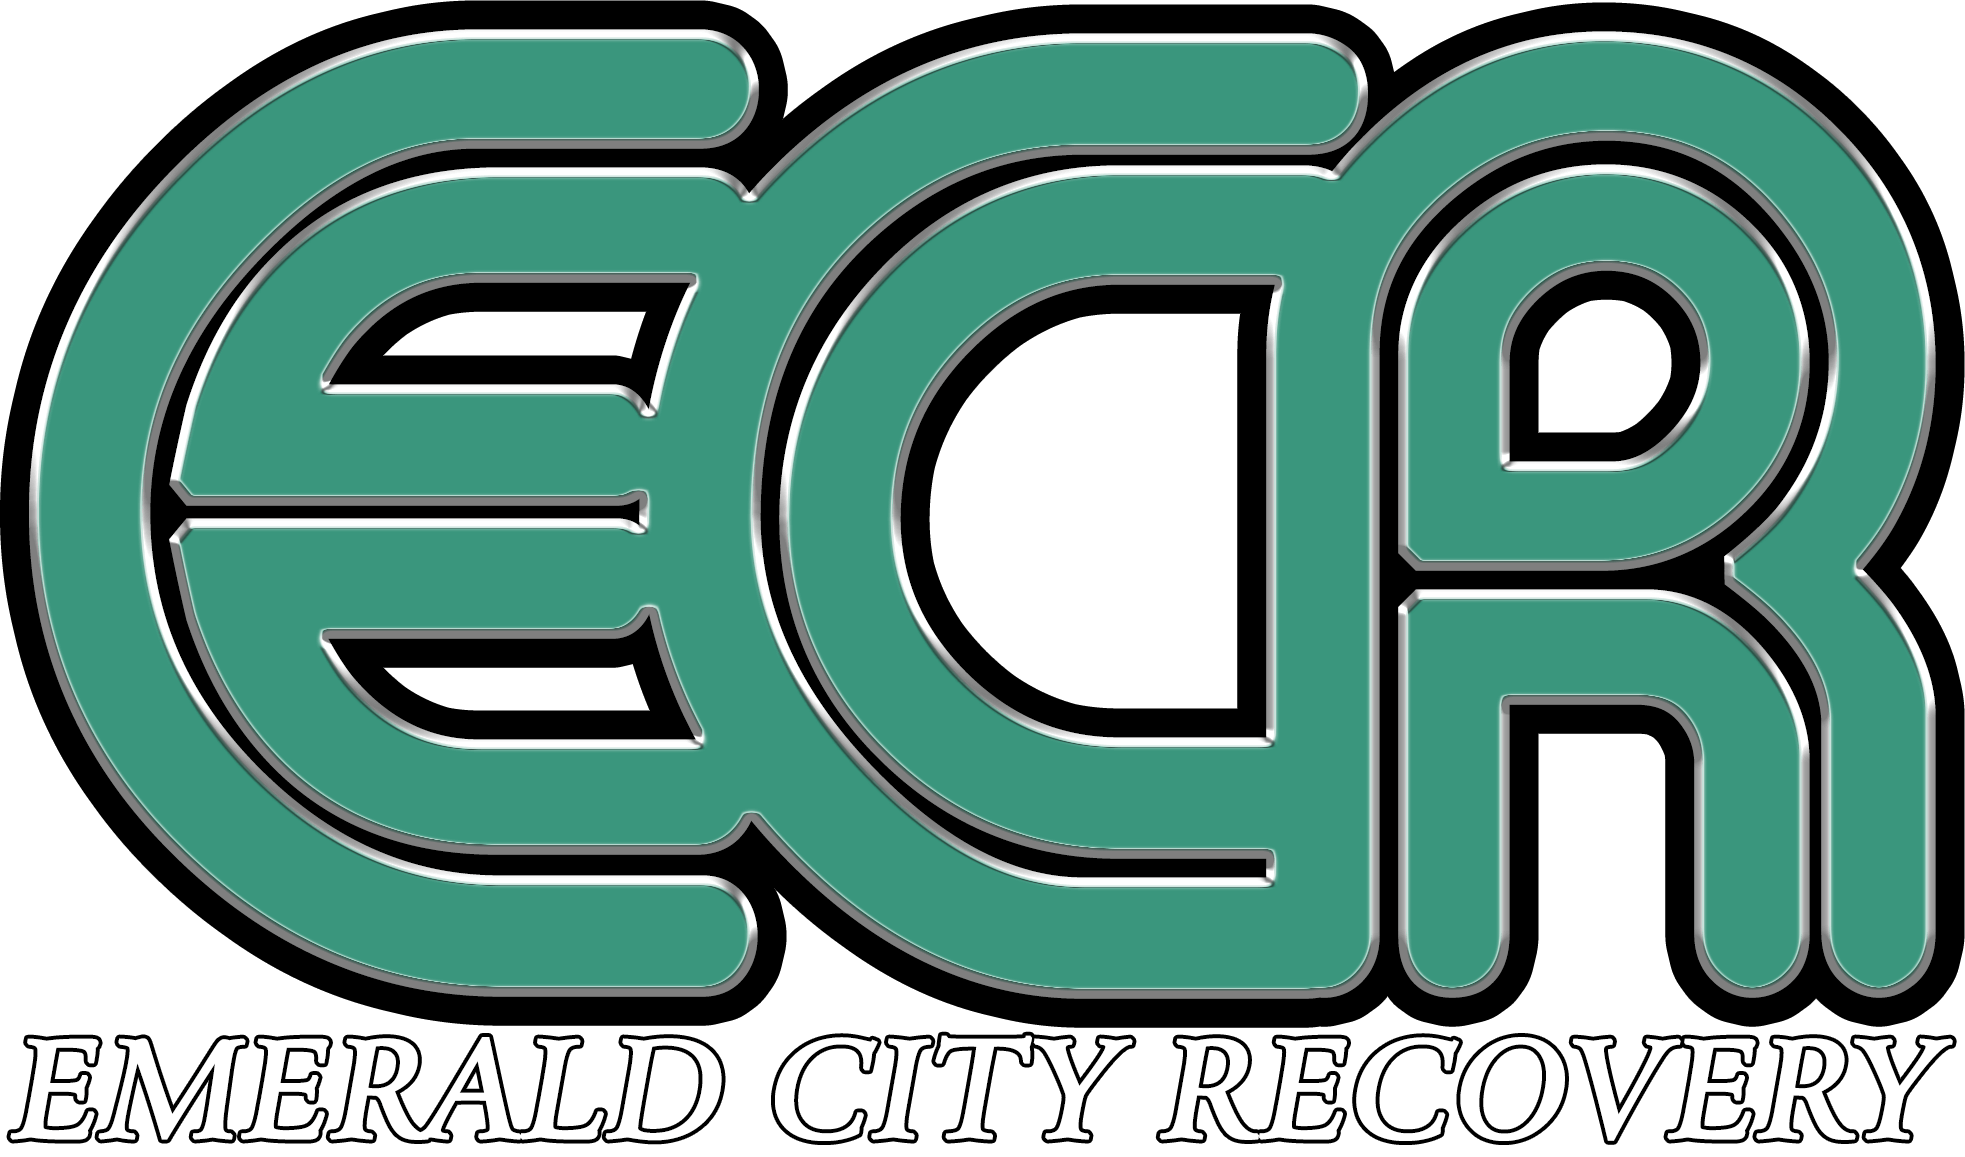 Emerald City Recovery provides secure storage in Washington state!